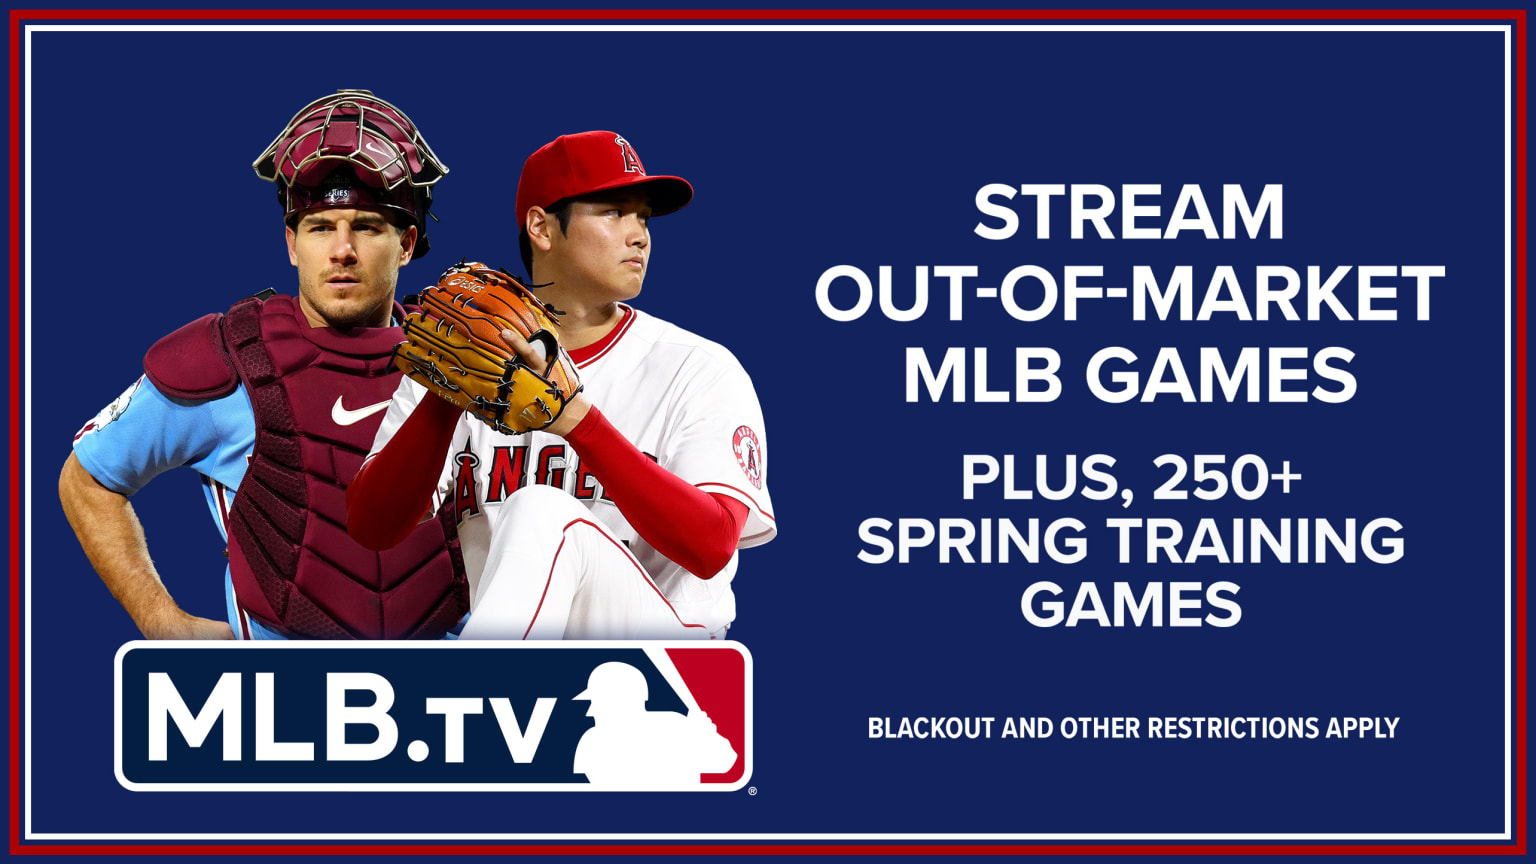 J.T. Realmuto and Shohei Ohtani are pictured next to text about MLB.TV features